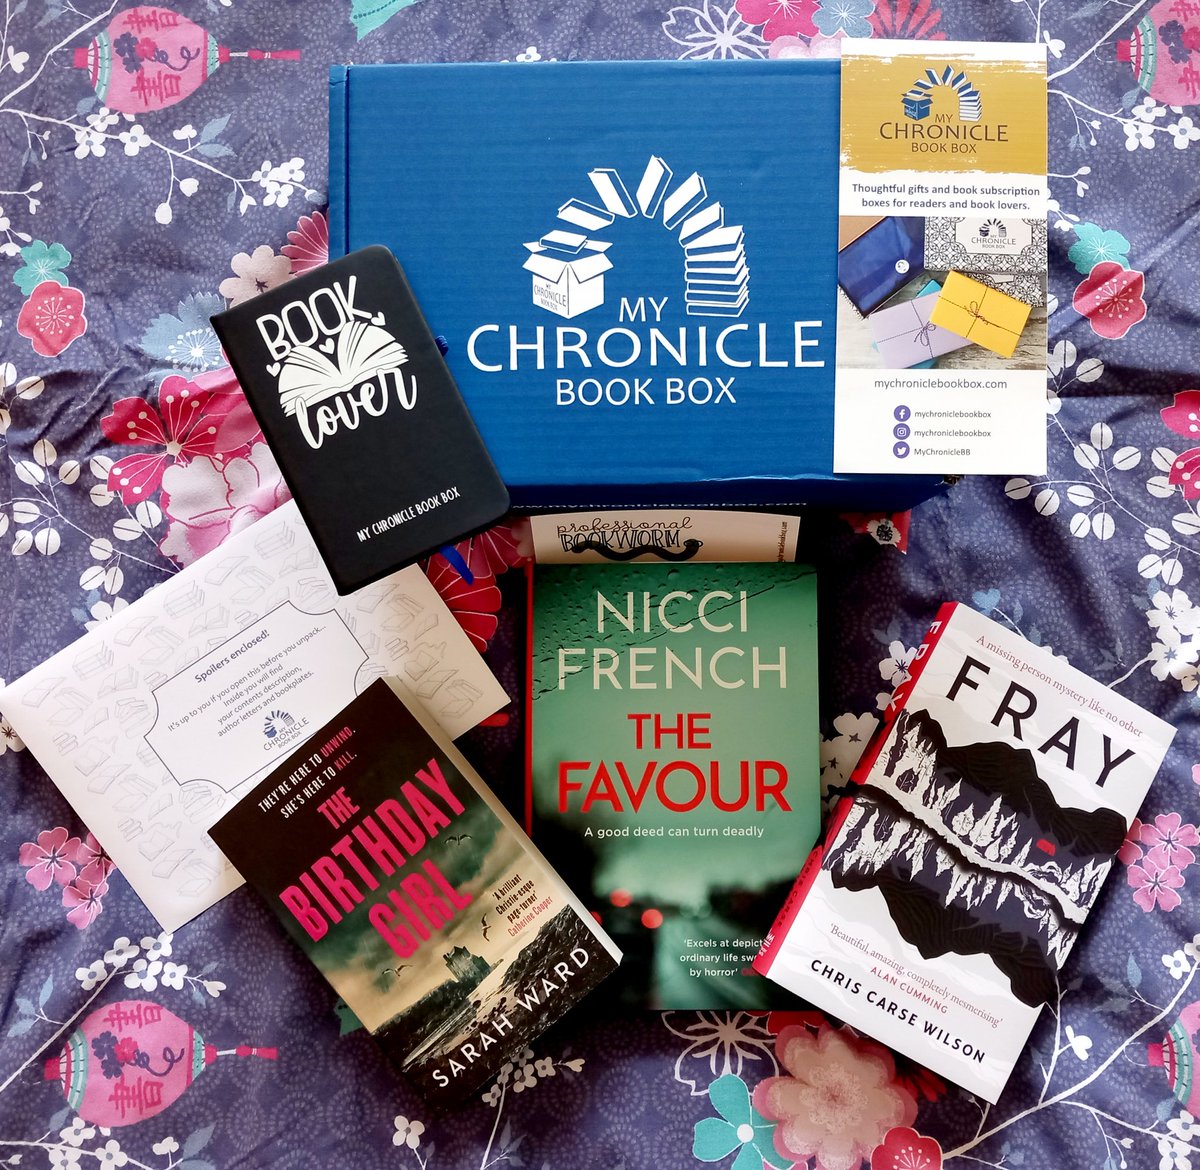 Huge Thanks to @MyChronicleBB for my #Prize a #CrimeandMystery #SubscriptionBox it's amazing! Full unboxing videos on my #Instagram Thank You so so much! #SoGrateful #BookCollector #BookTwitter #BookBlogger 🥰❤️🥰